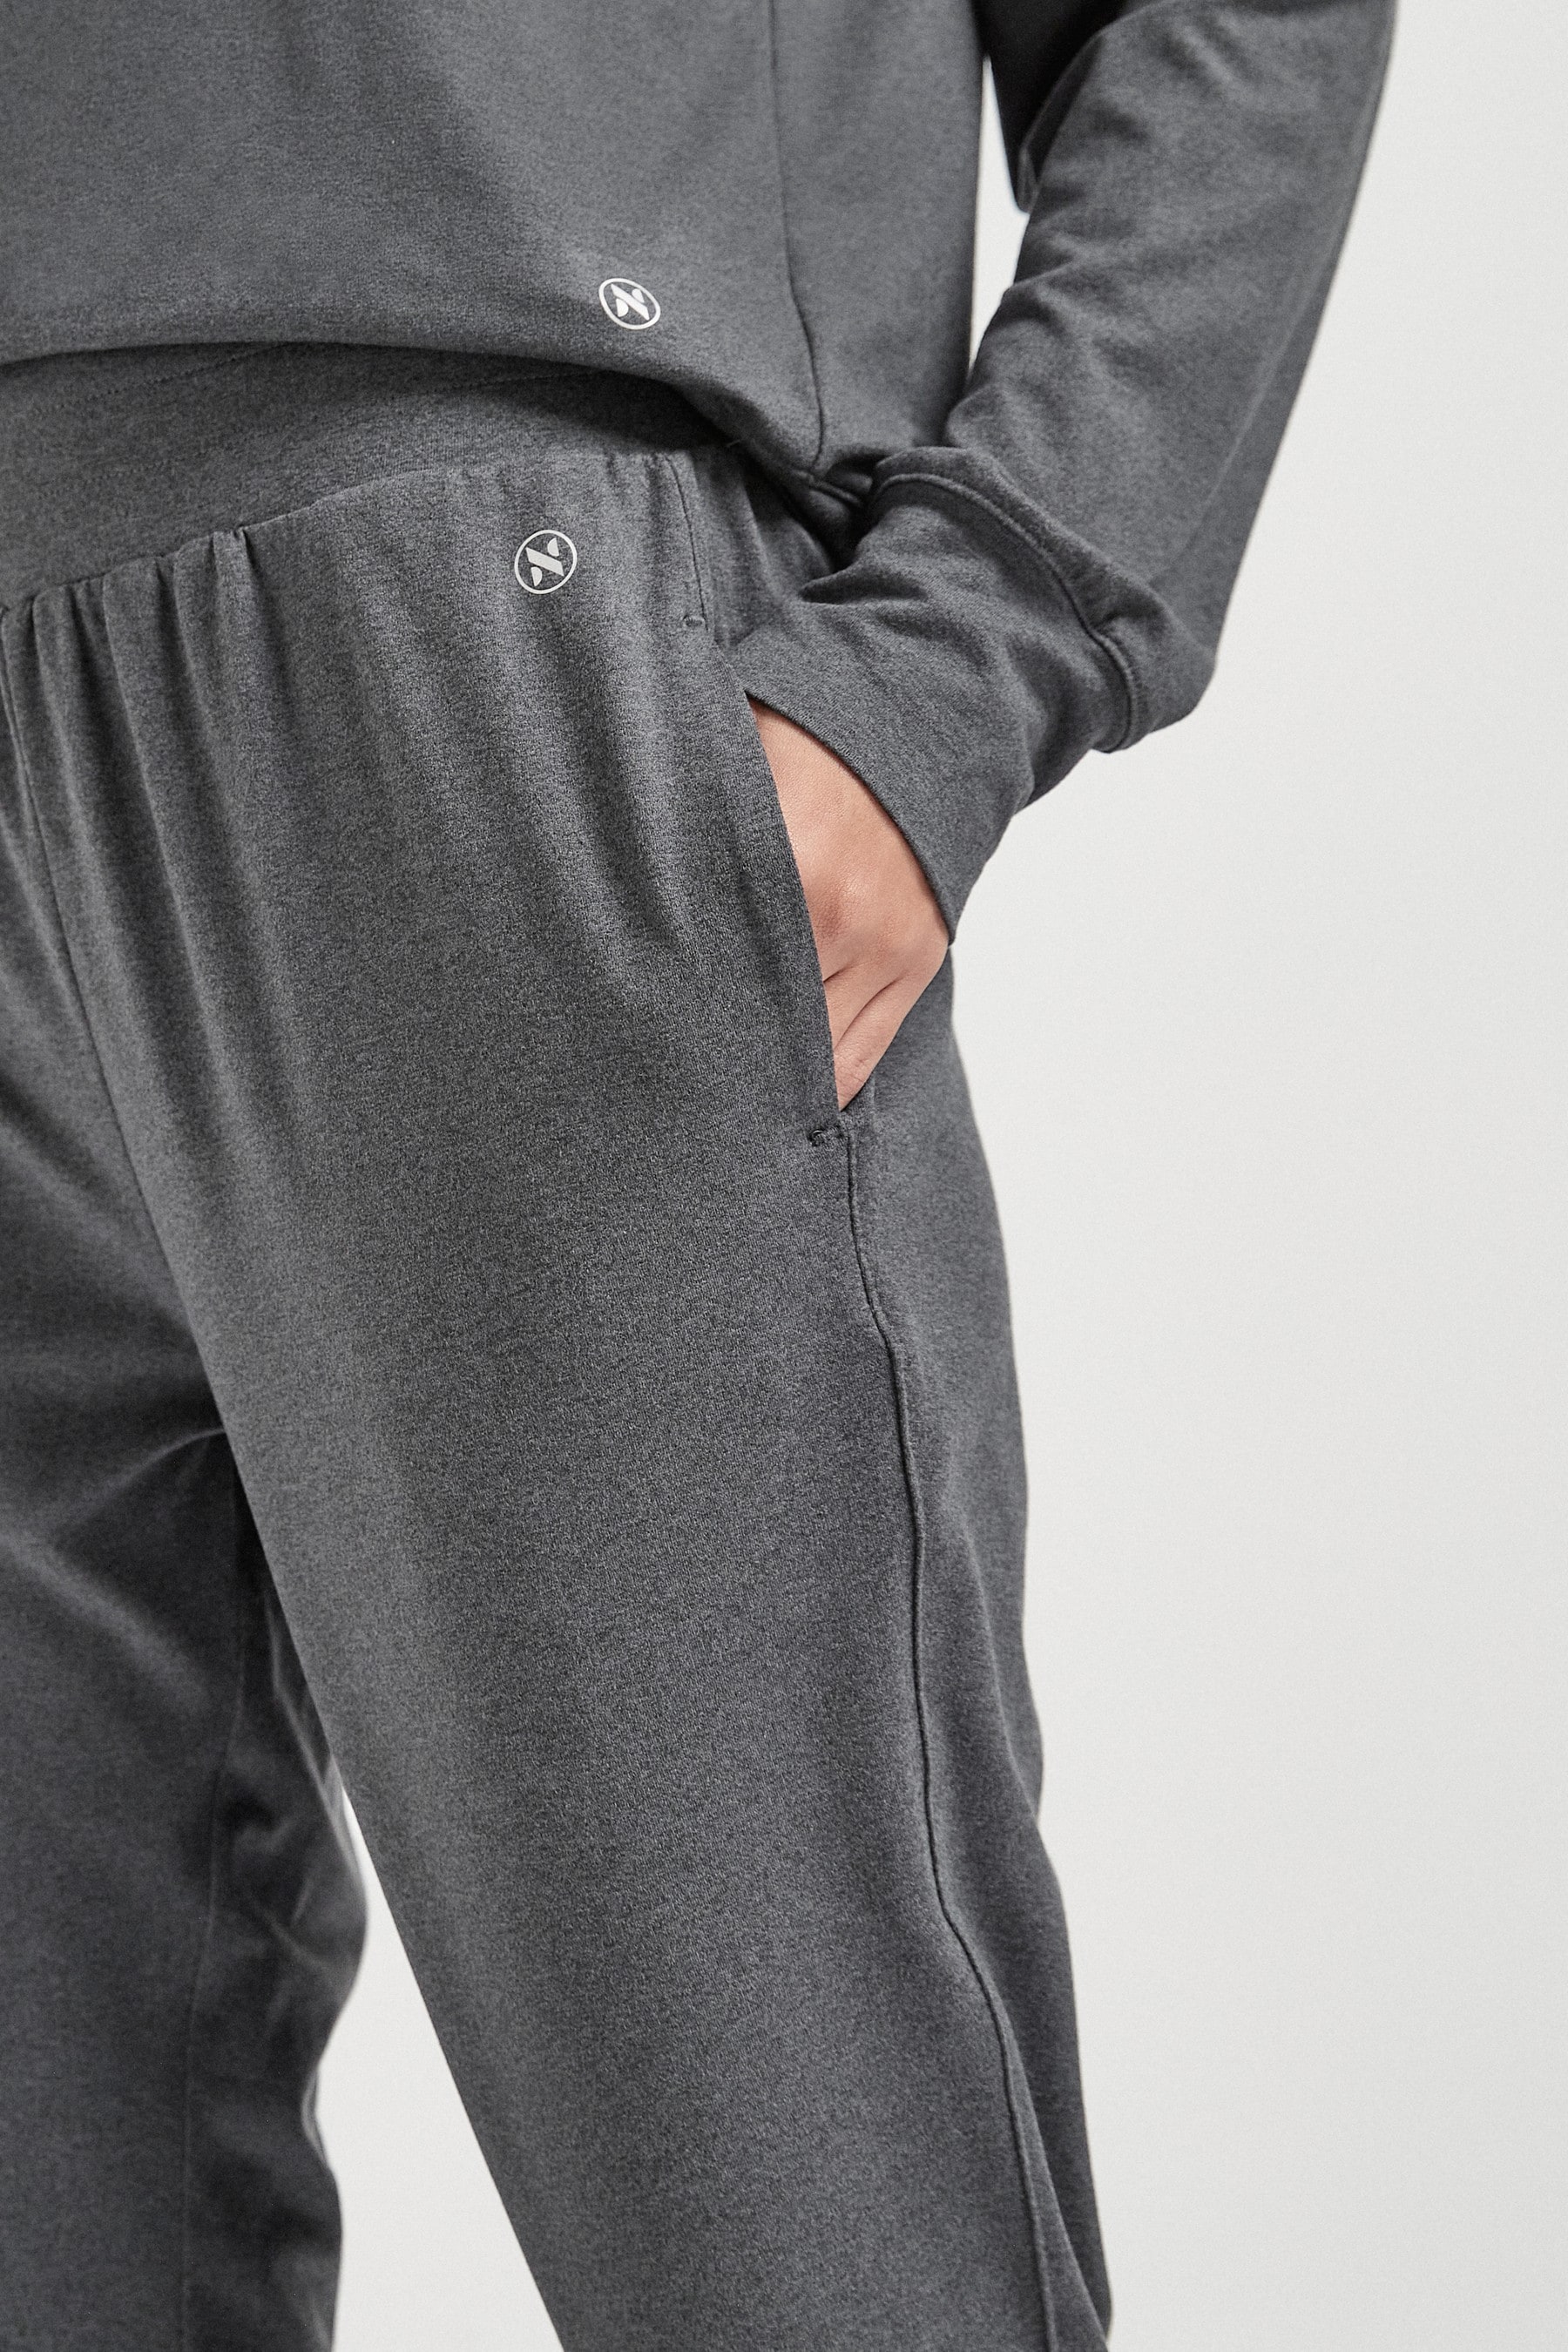 Buy Charcoal Lounge Joggers from the Next UK online shop